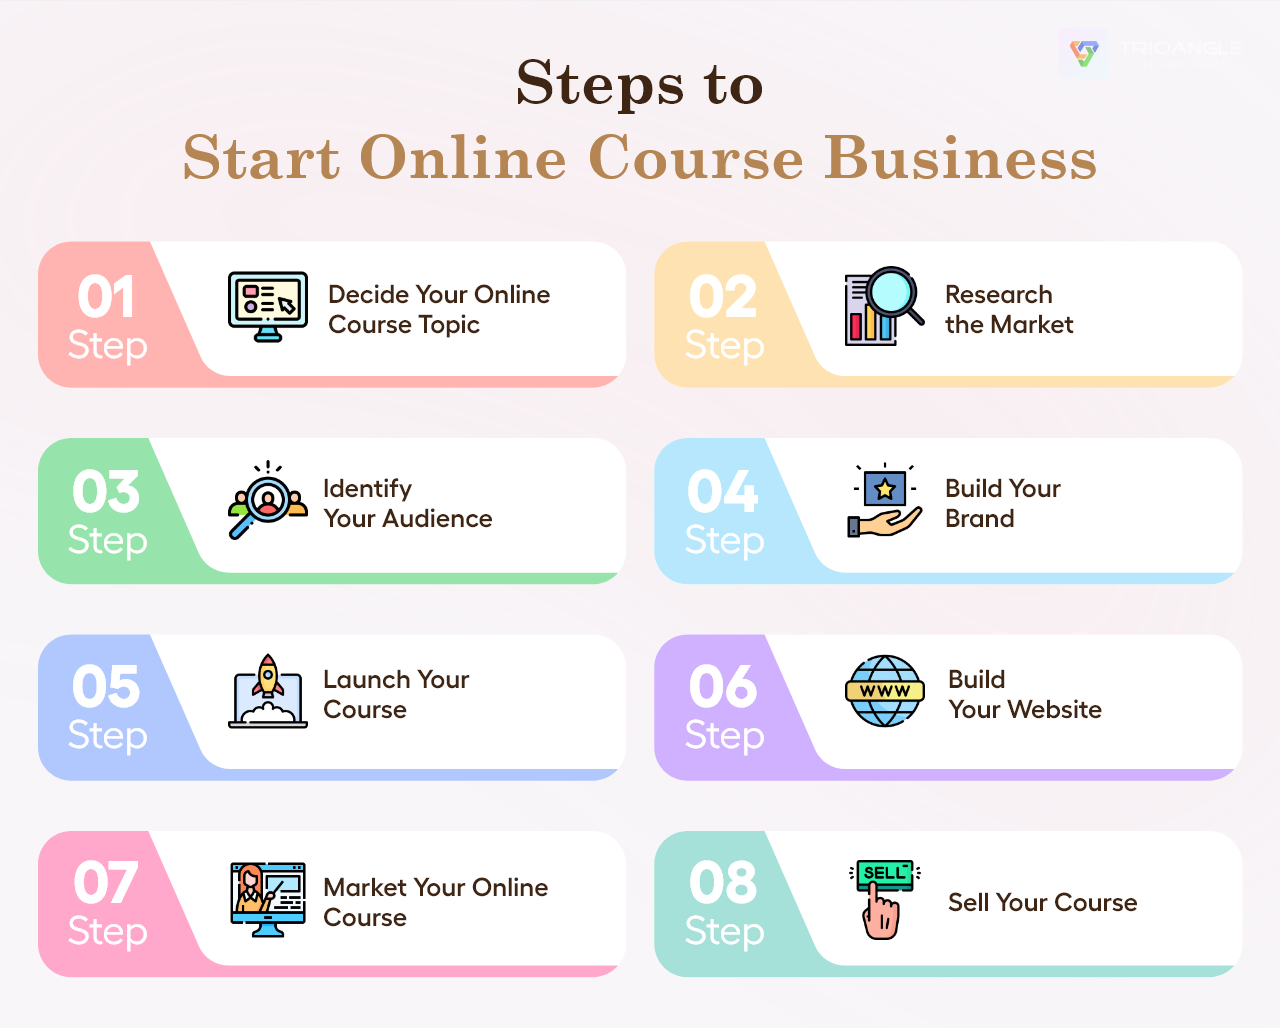 Steps to Start an Online Course Business